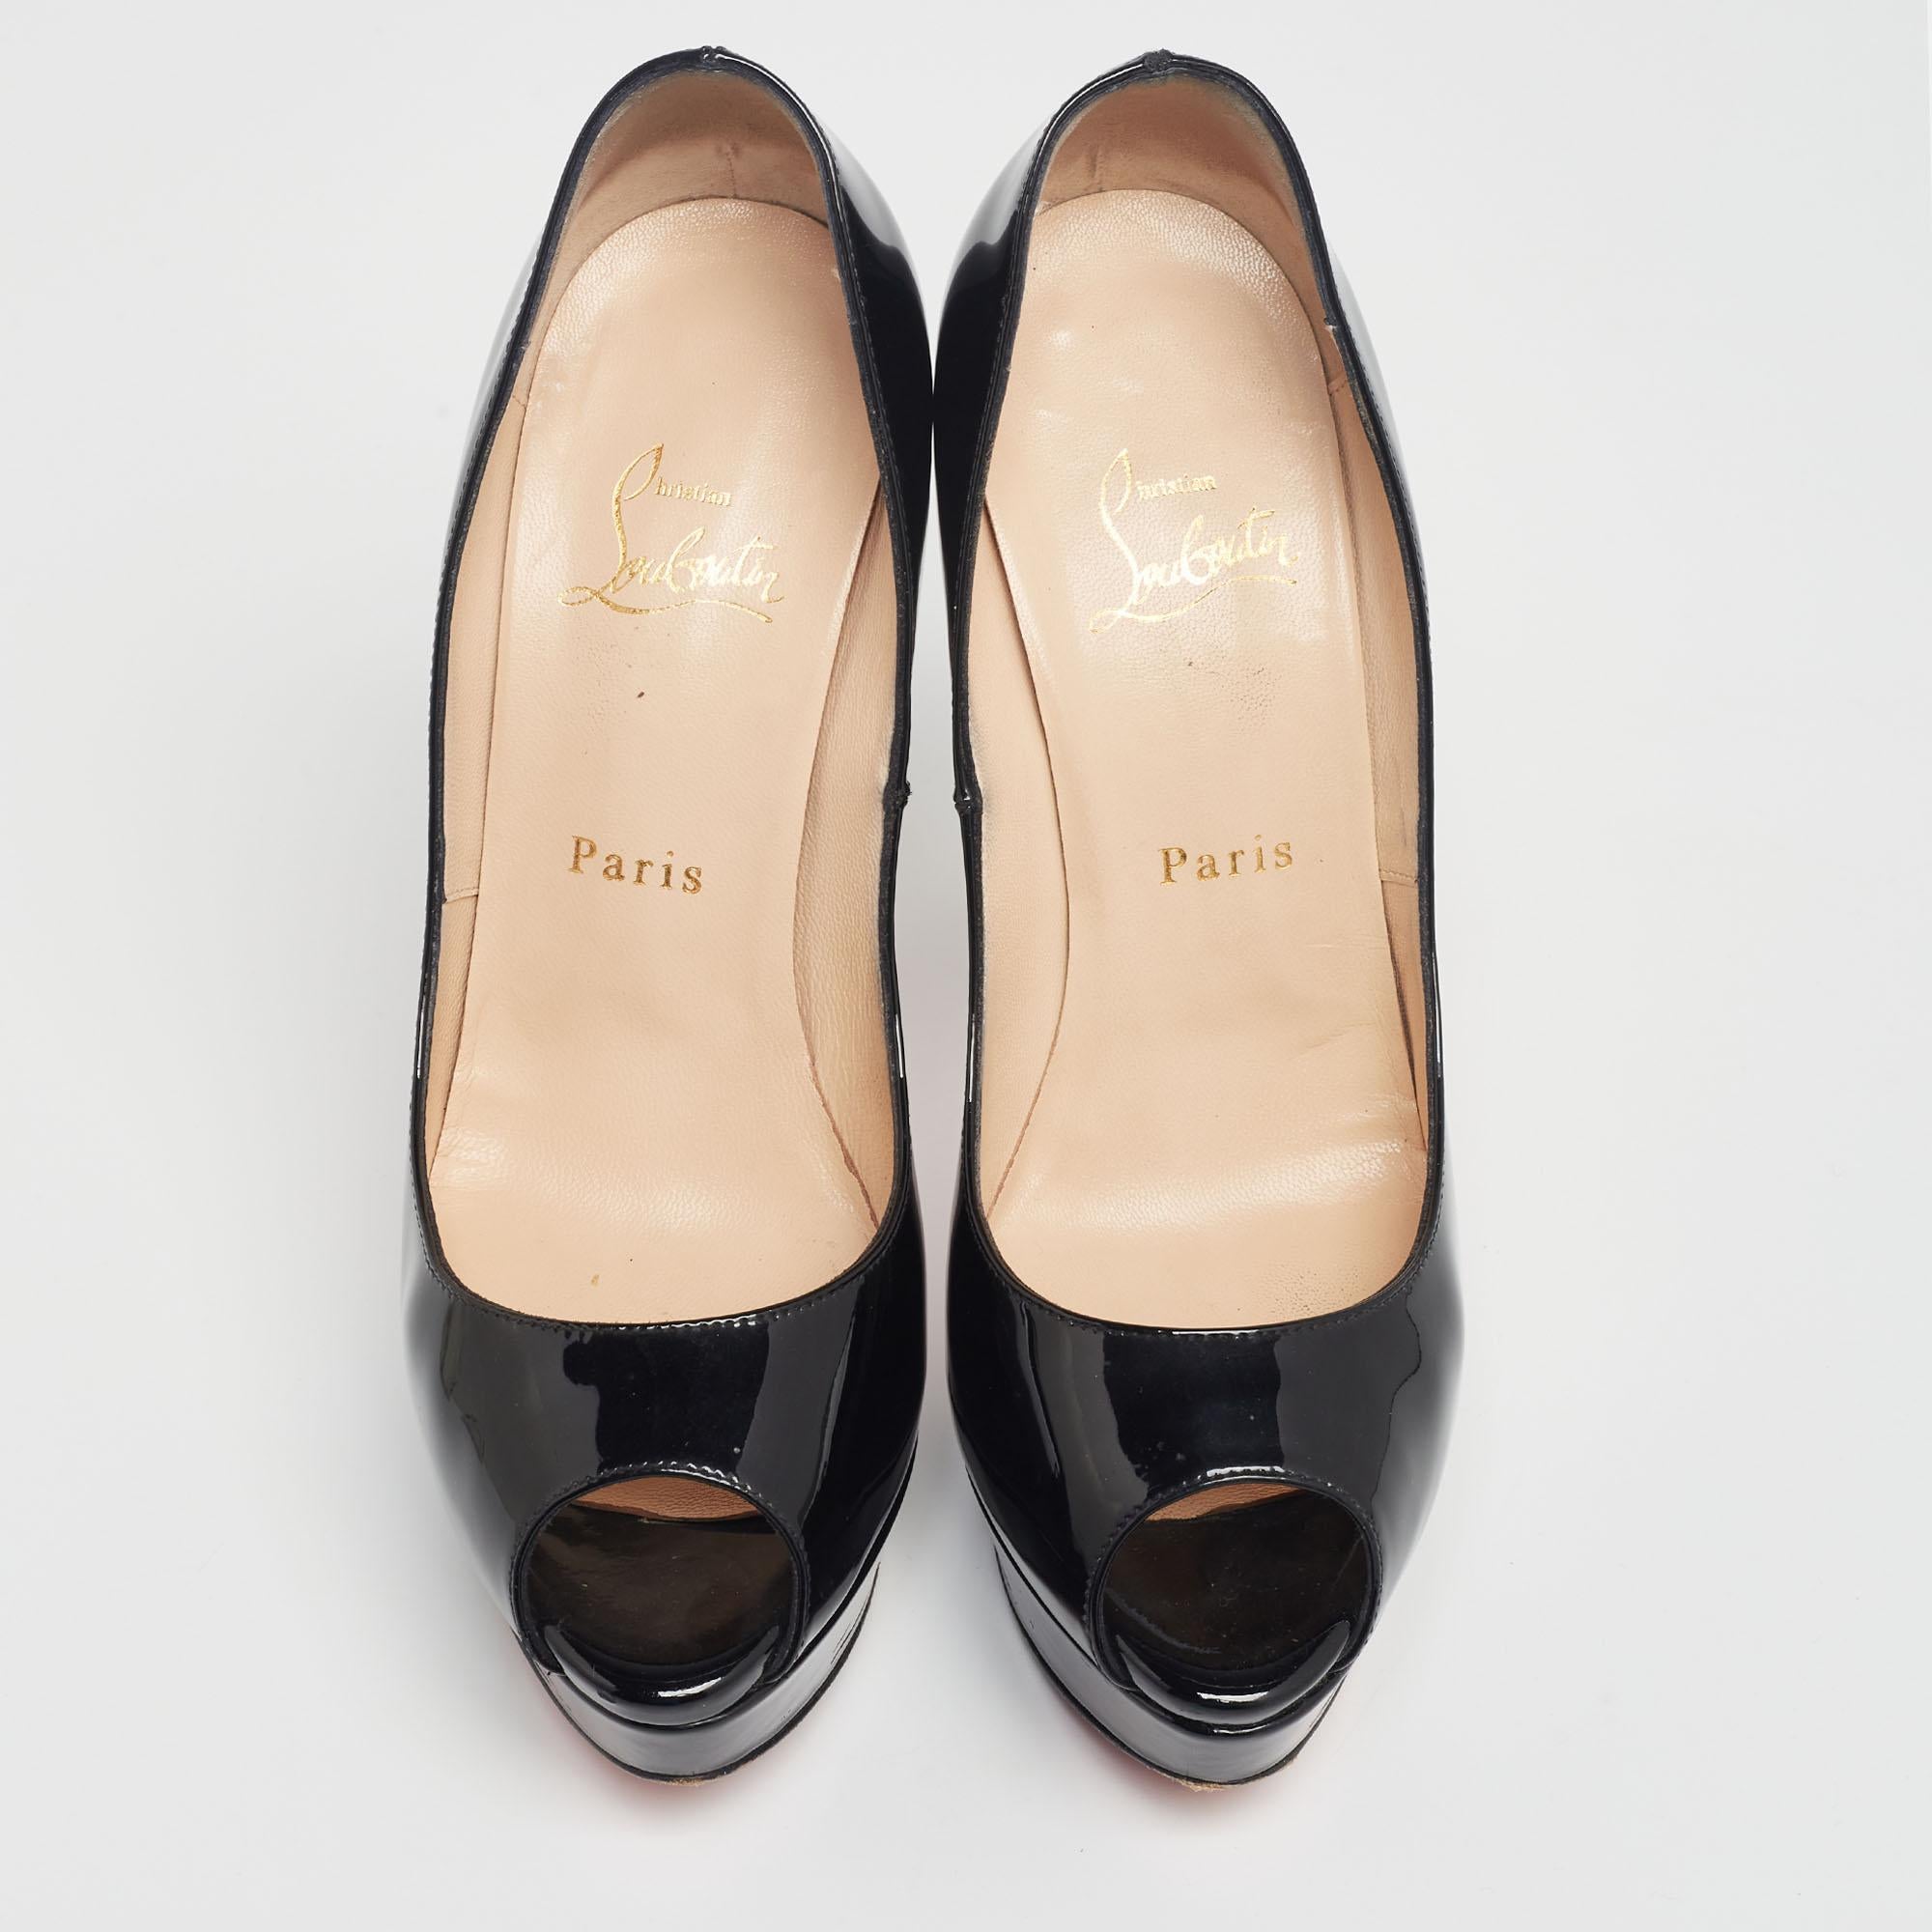 Stand out from the crowd with this gorgeous pair of Louboutins that exude high fashion with class! Crafted from patent leather, this is a creation from their Lady Peep collection. They feature a classic black shade with peep toes and a glossy